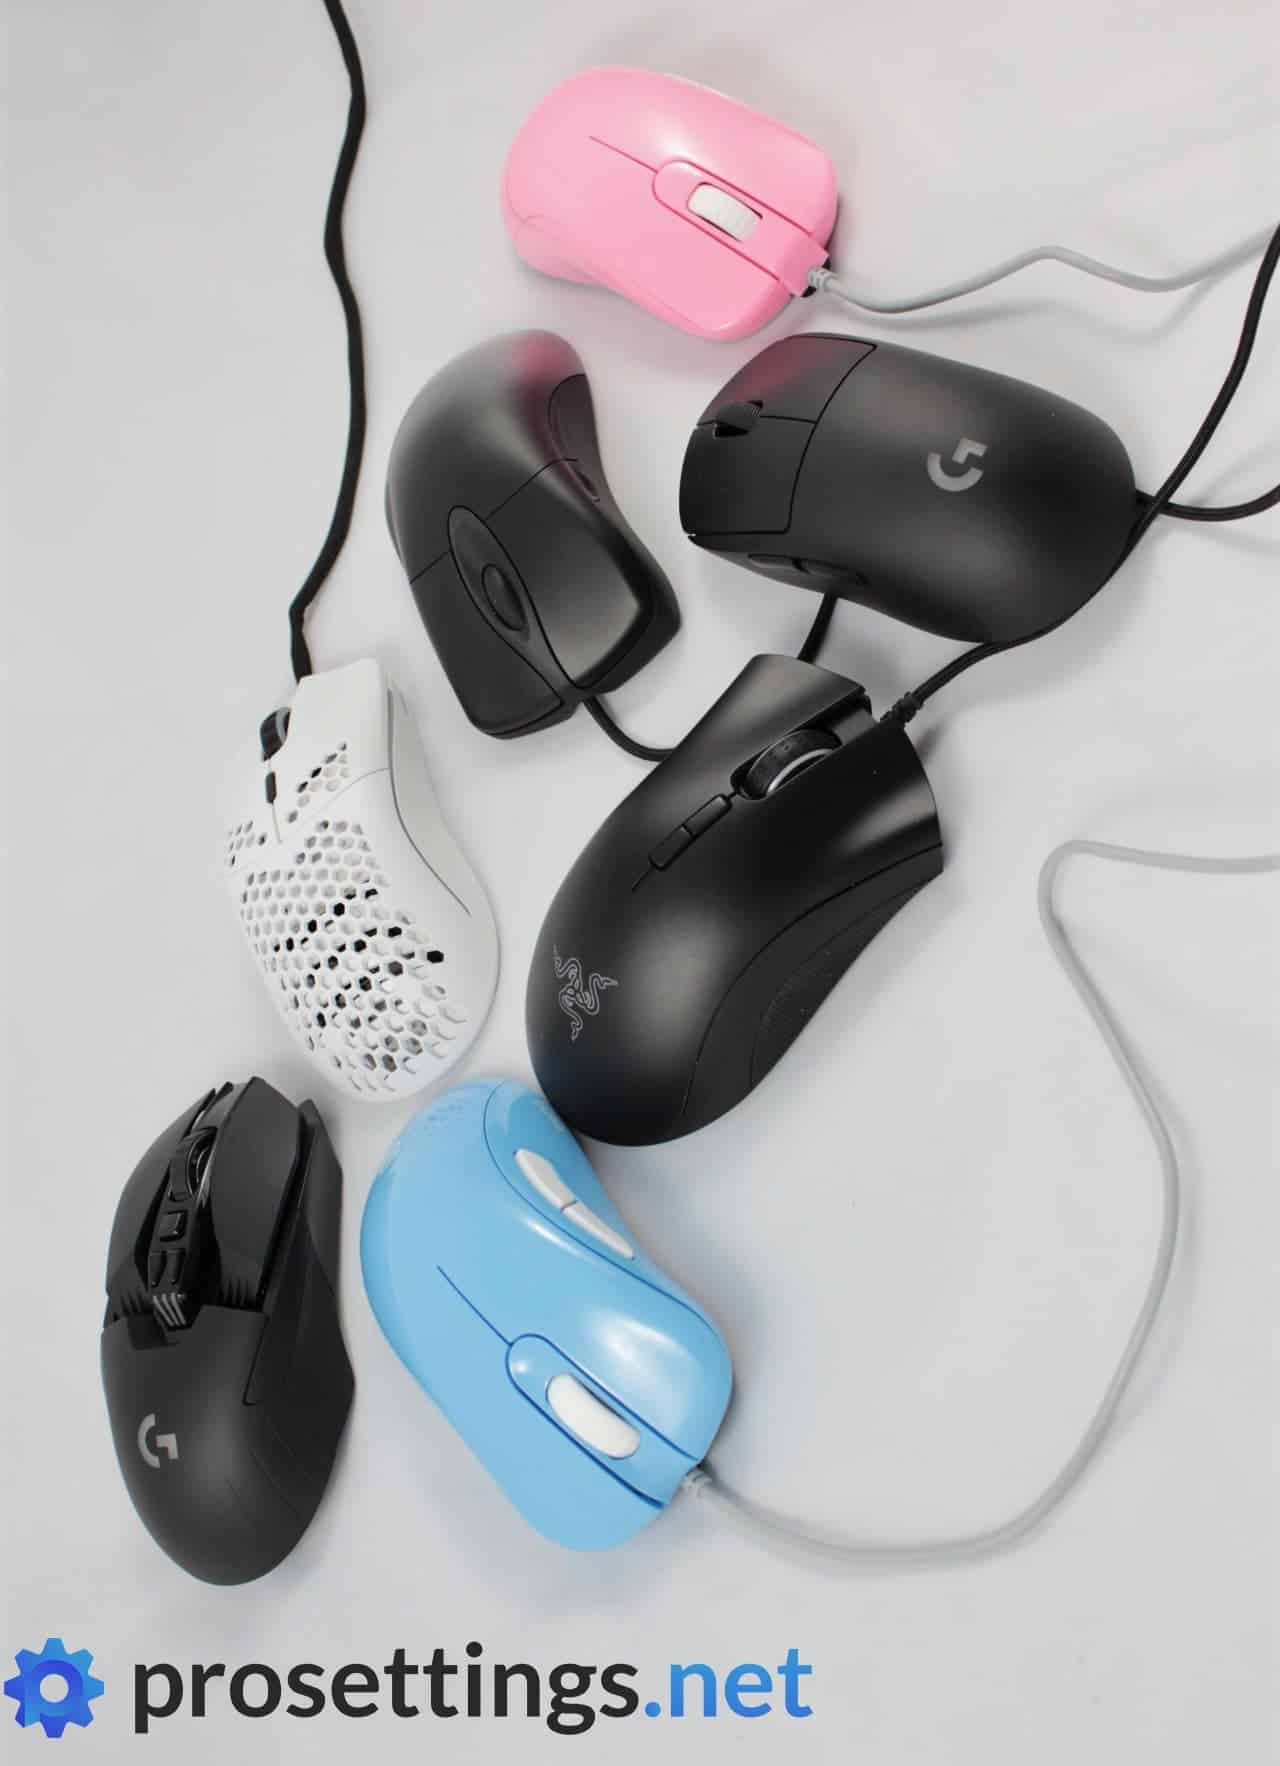 Get the right gaming mouse